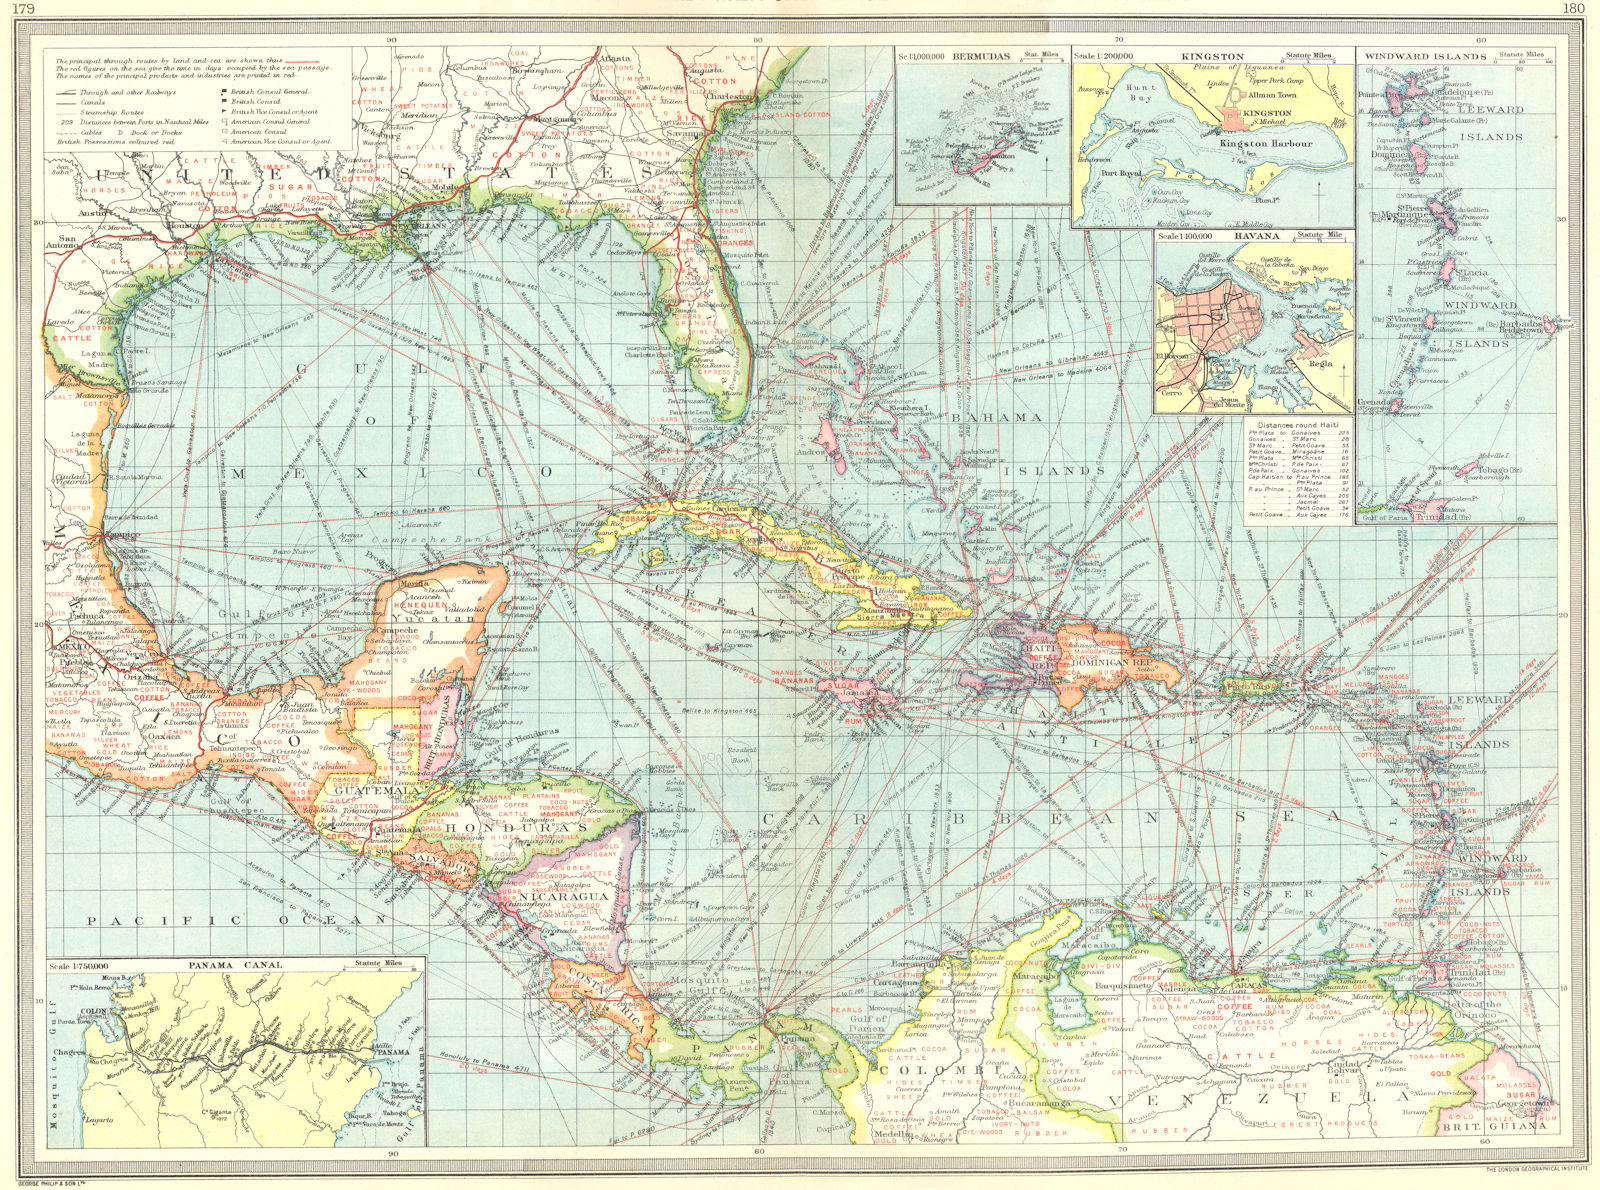 CARIBBEAN CENTRAL AMERICA. Industry & Comms; Panama Canal; Bermuda 1907 map